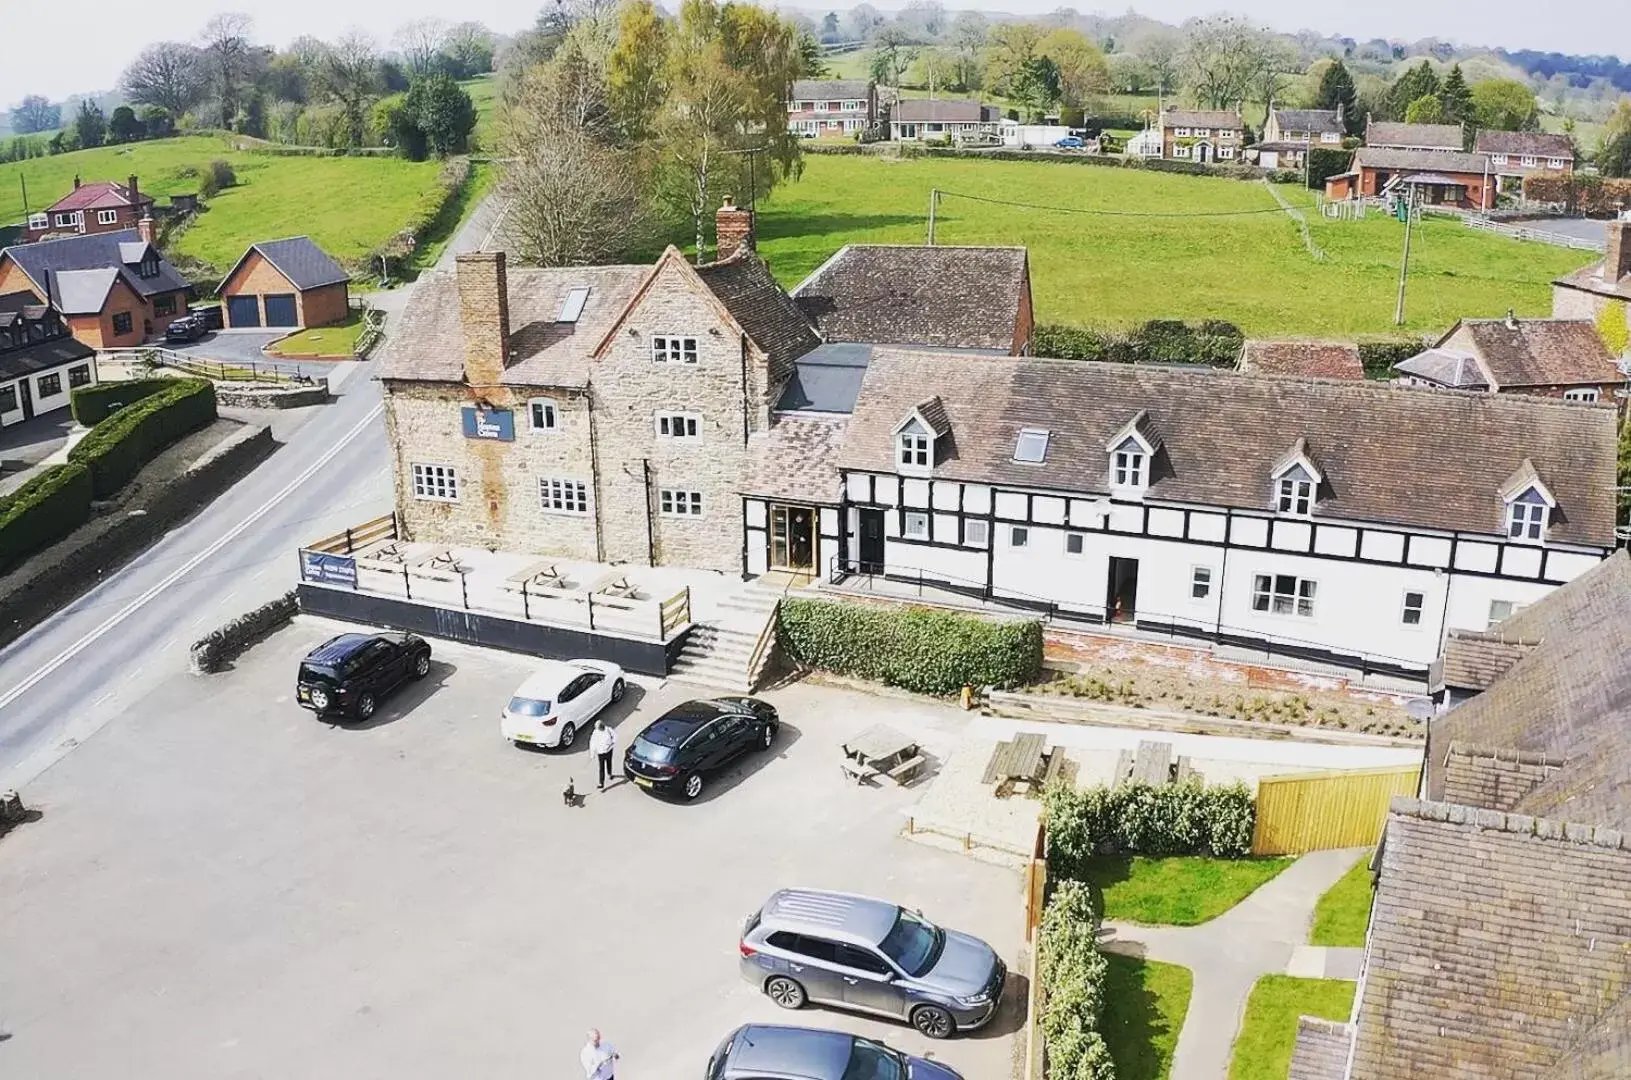 Bird's-eye View in The Hopton Crown